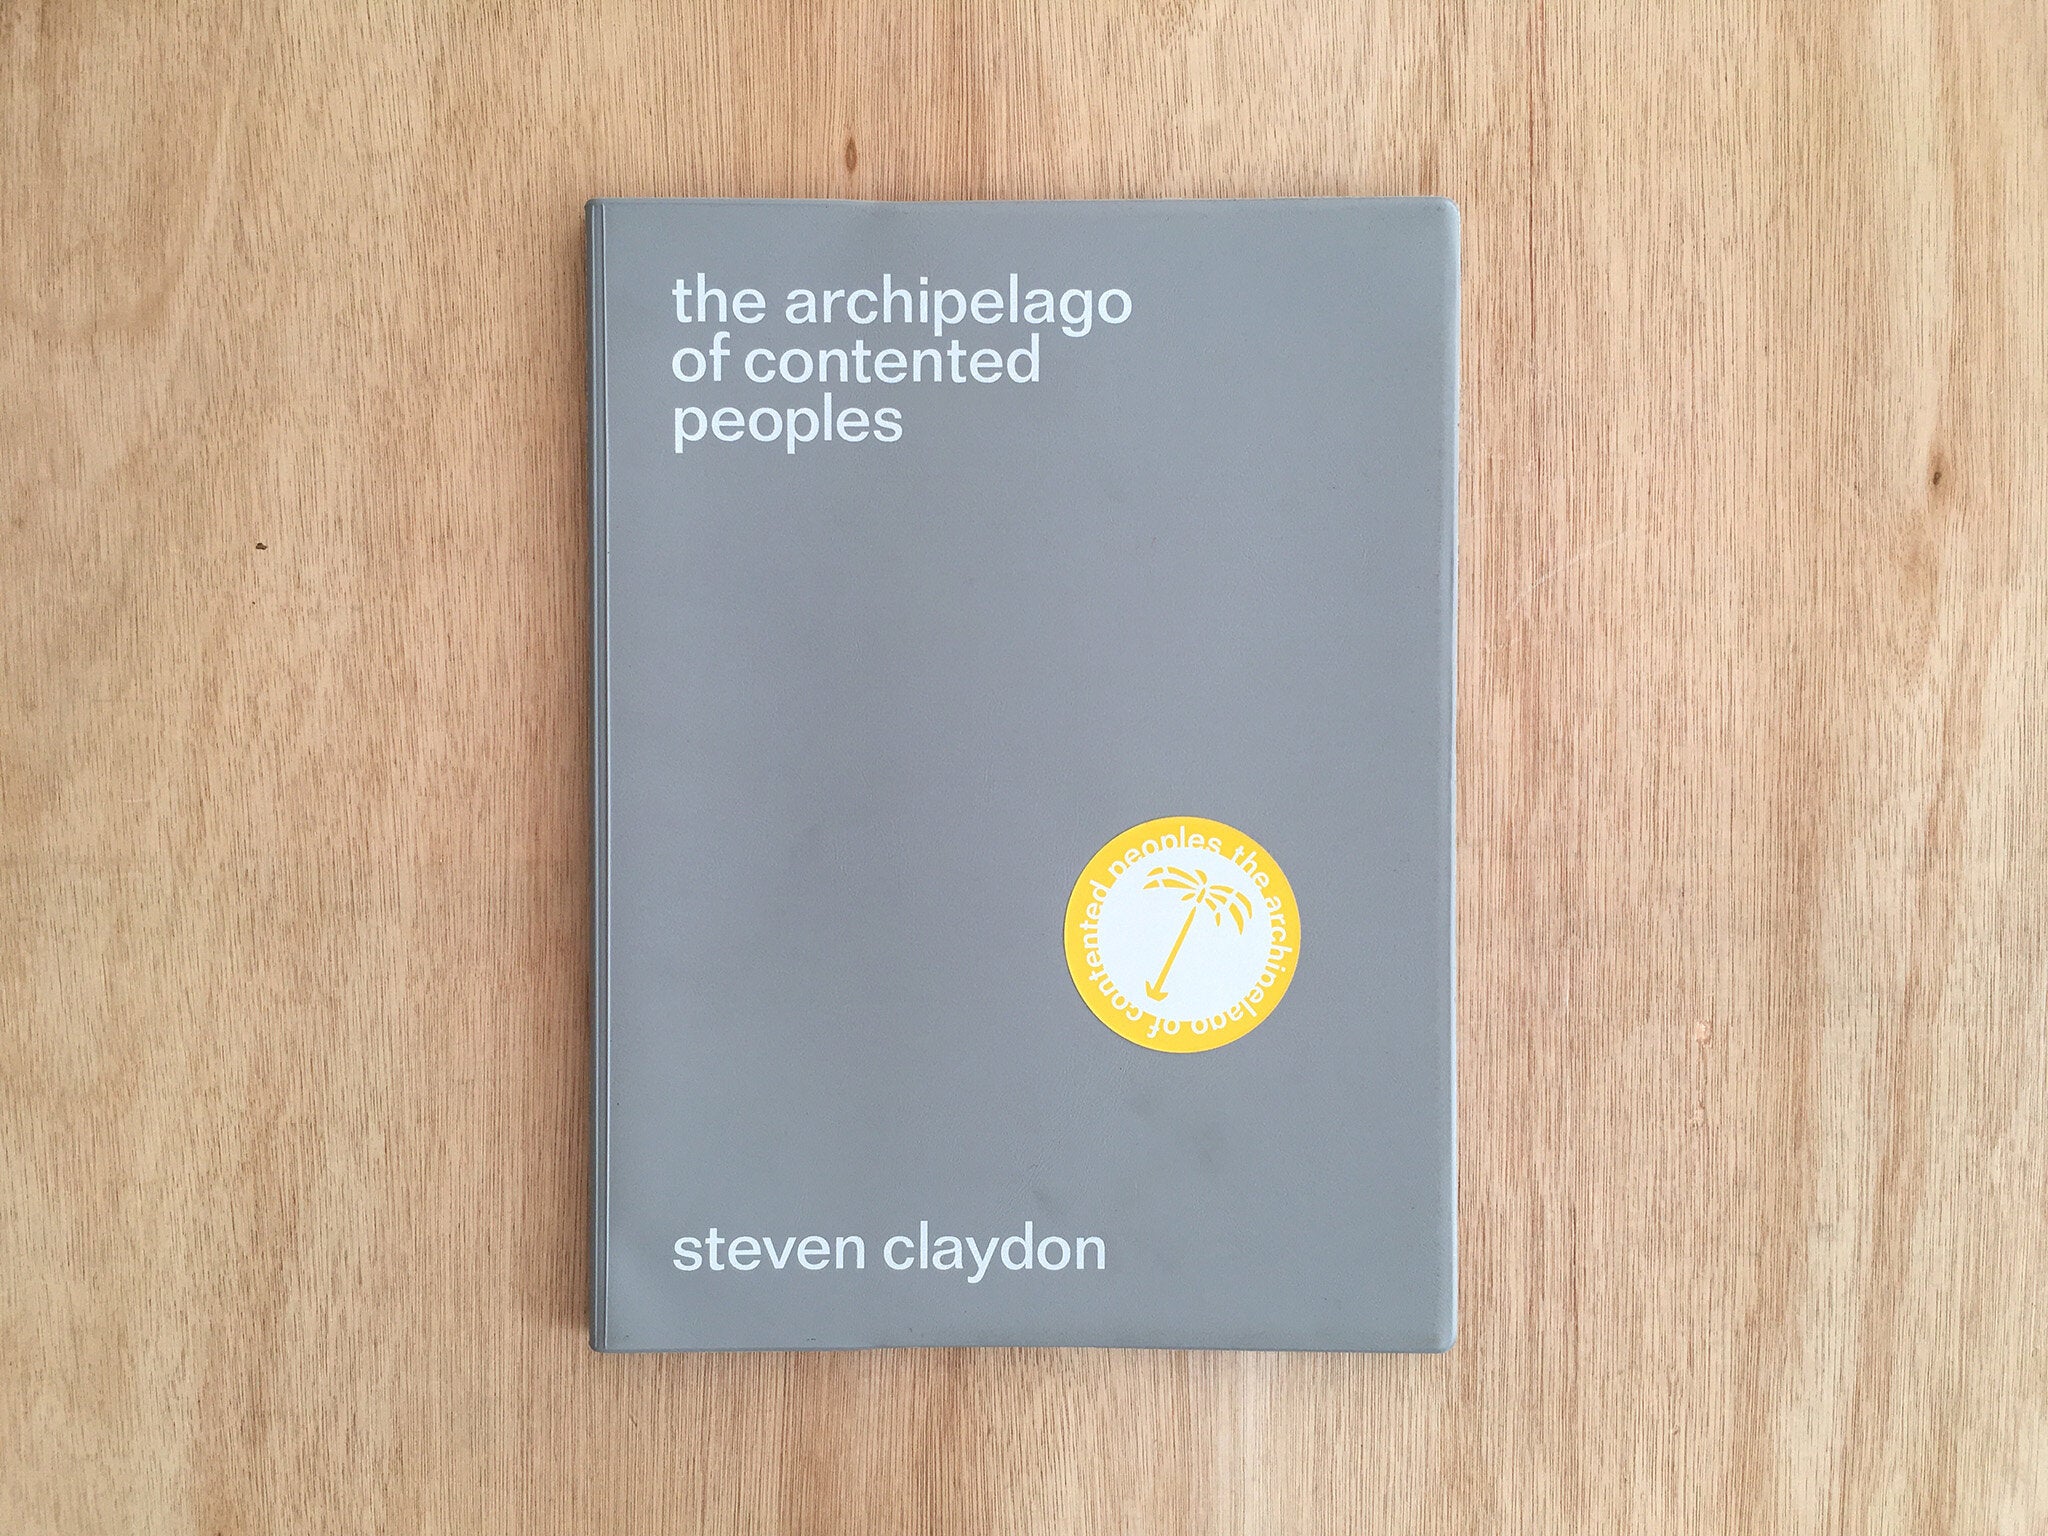 THE ARCHIPELAGO OF CONTENTED PEOPLES by Steven Claydon